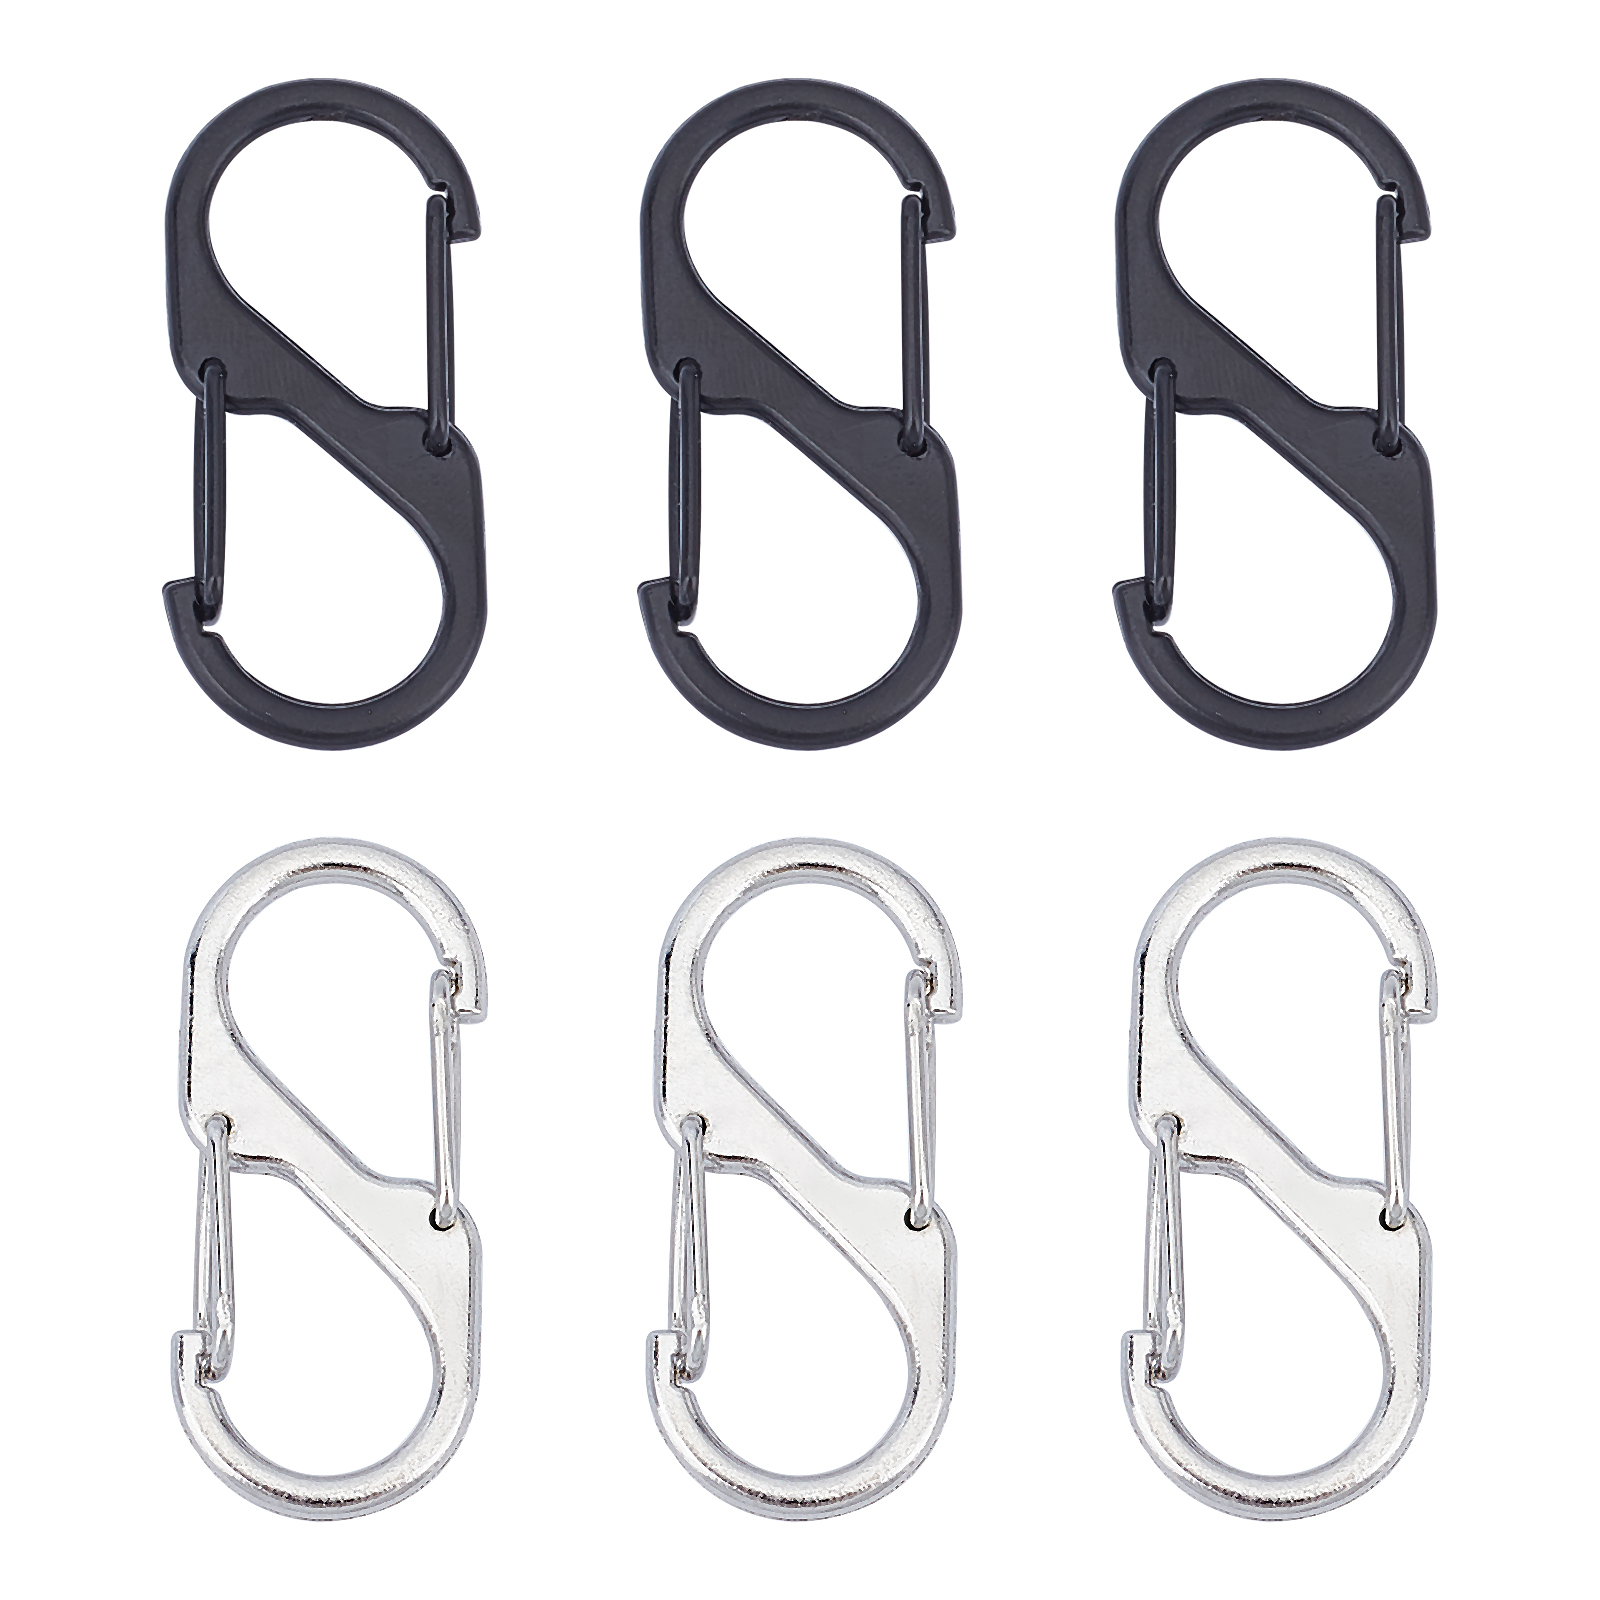 UNICRAFTALE Stainless Steel Rock Climbing Carabiners, Key Clasps, S ...